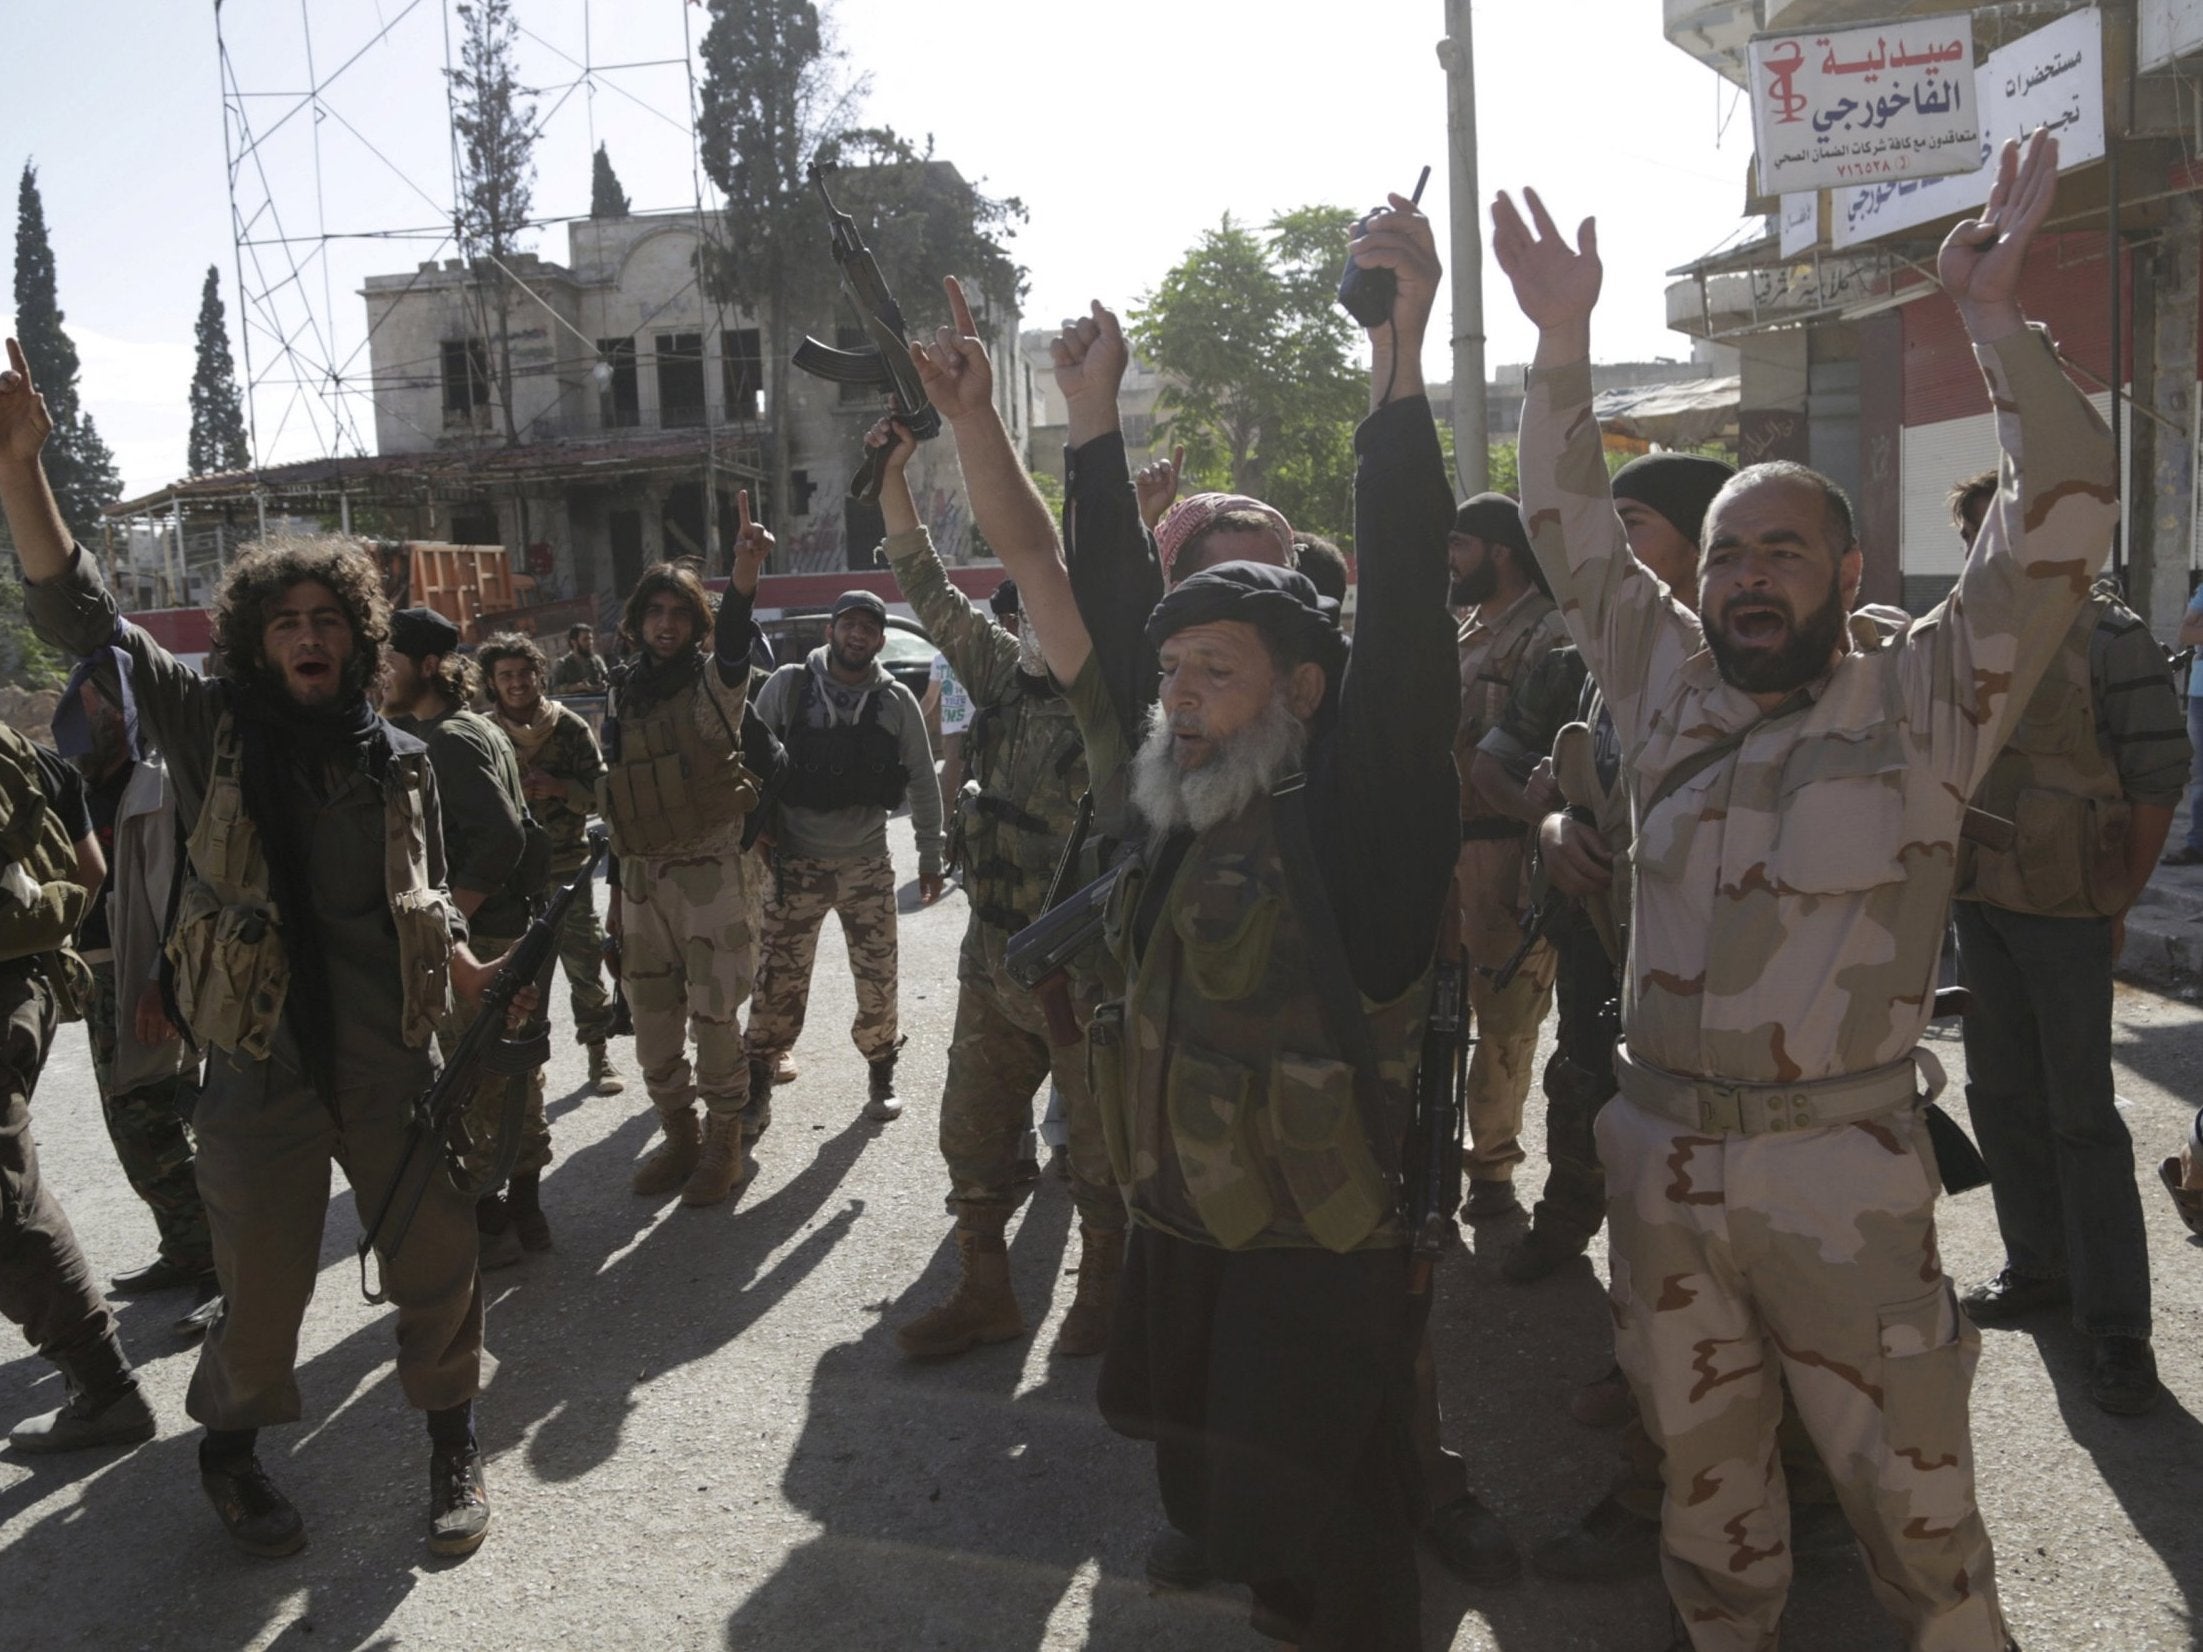 Members of the former al-Qaeda affiliate in Syria, now called Hayat Tahrir al-Sham, gesture as they cheer in the northwestern city of Ariha, after a coalition of insurgent groups seized the area in Idlib province on 29 May 2015